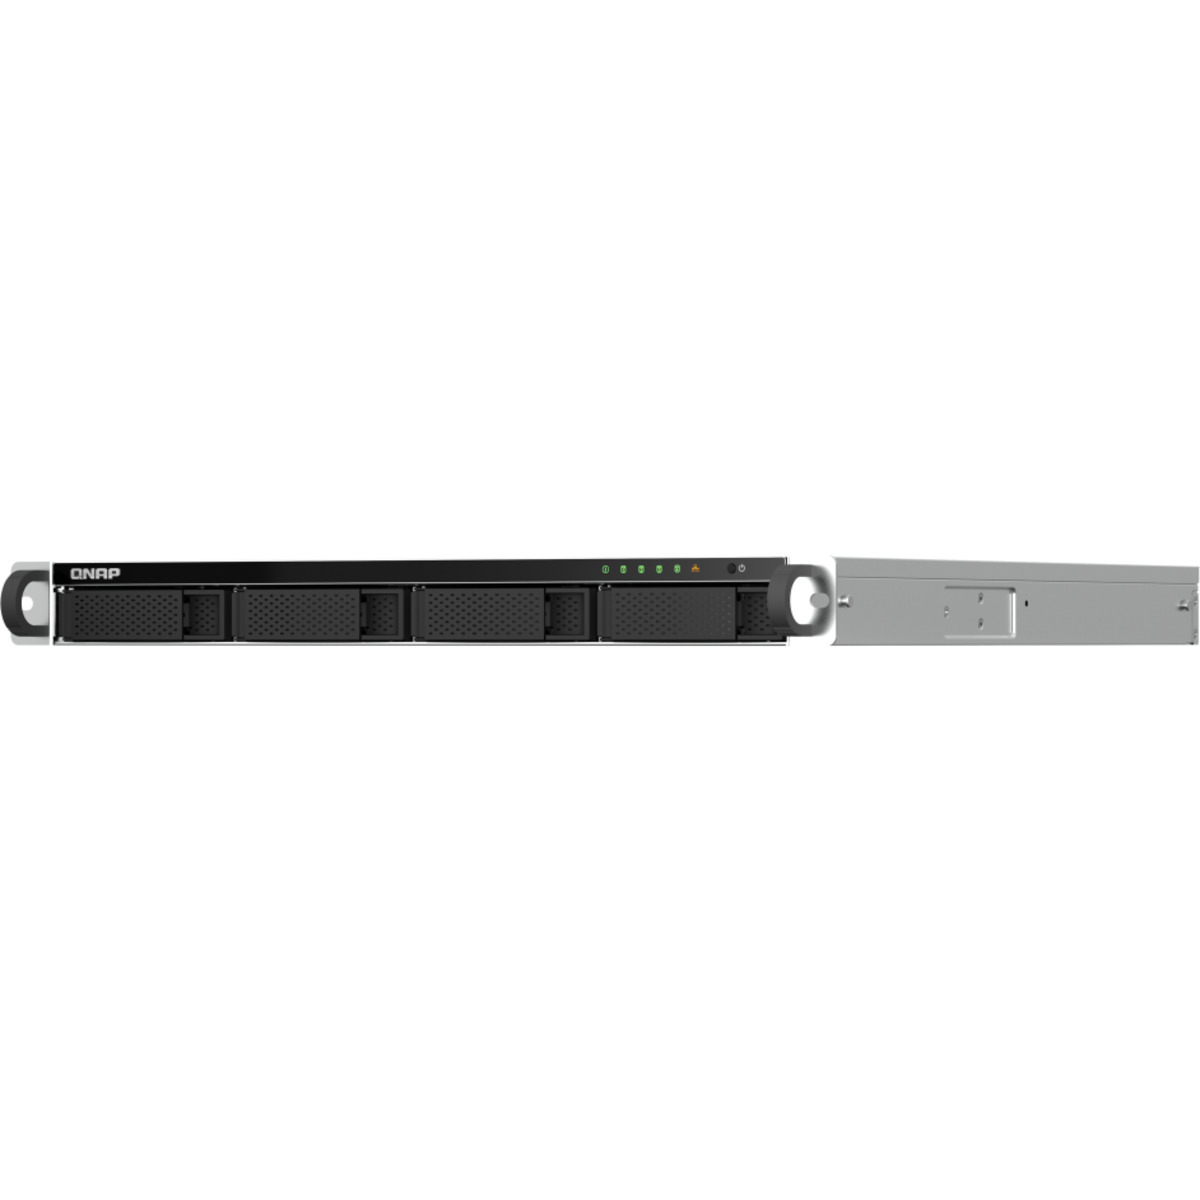 QNAP TS-464U 64tb 4-Bay RackMount Multimedia / Power User / Business NAS - Network Attached Storage Device 4x16tb Seagate IronWolf Pro ST16000NT001 3.5 7200rpm SATA 6Gb/s HDD NAS Class Drives Installed - Burn-In Tested - ON SALE TS-464U